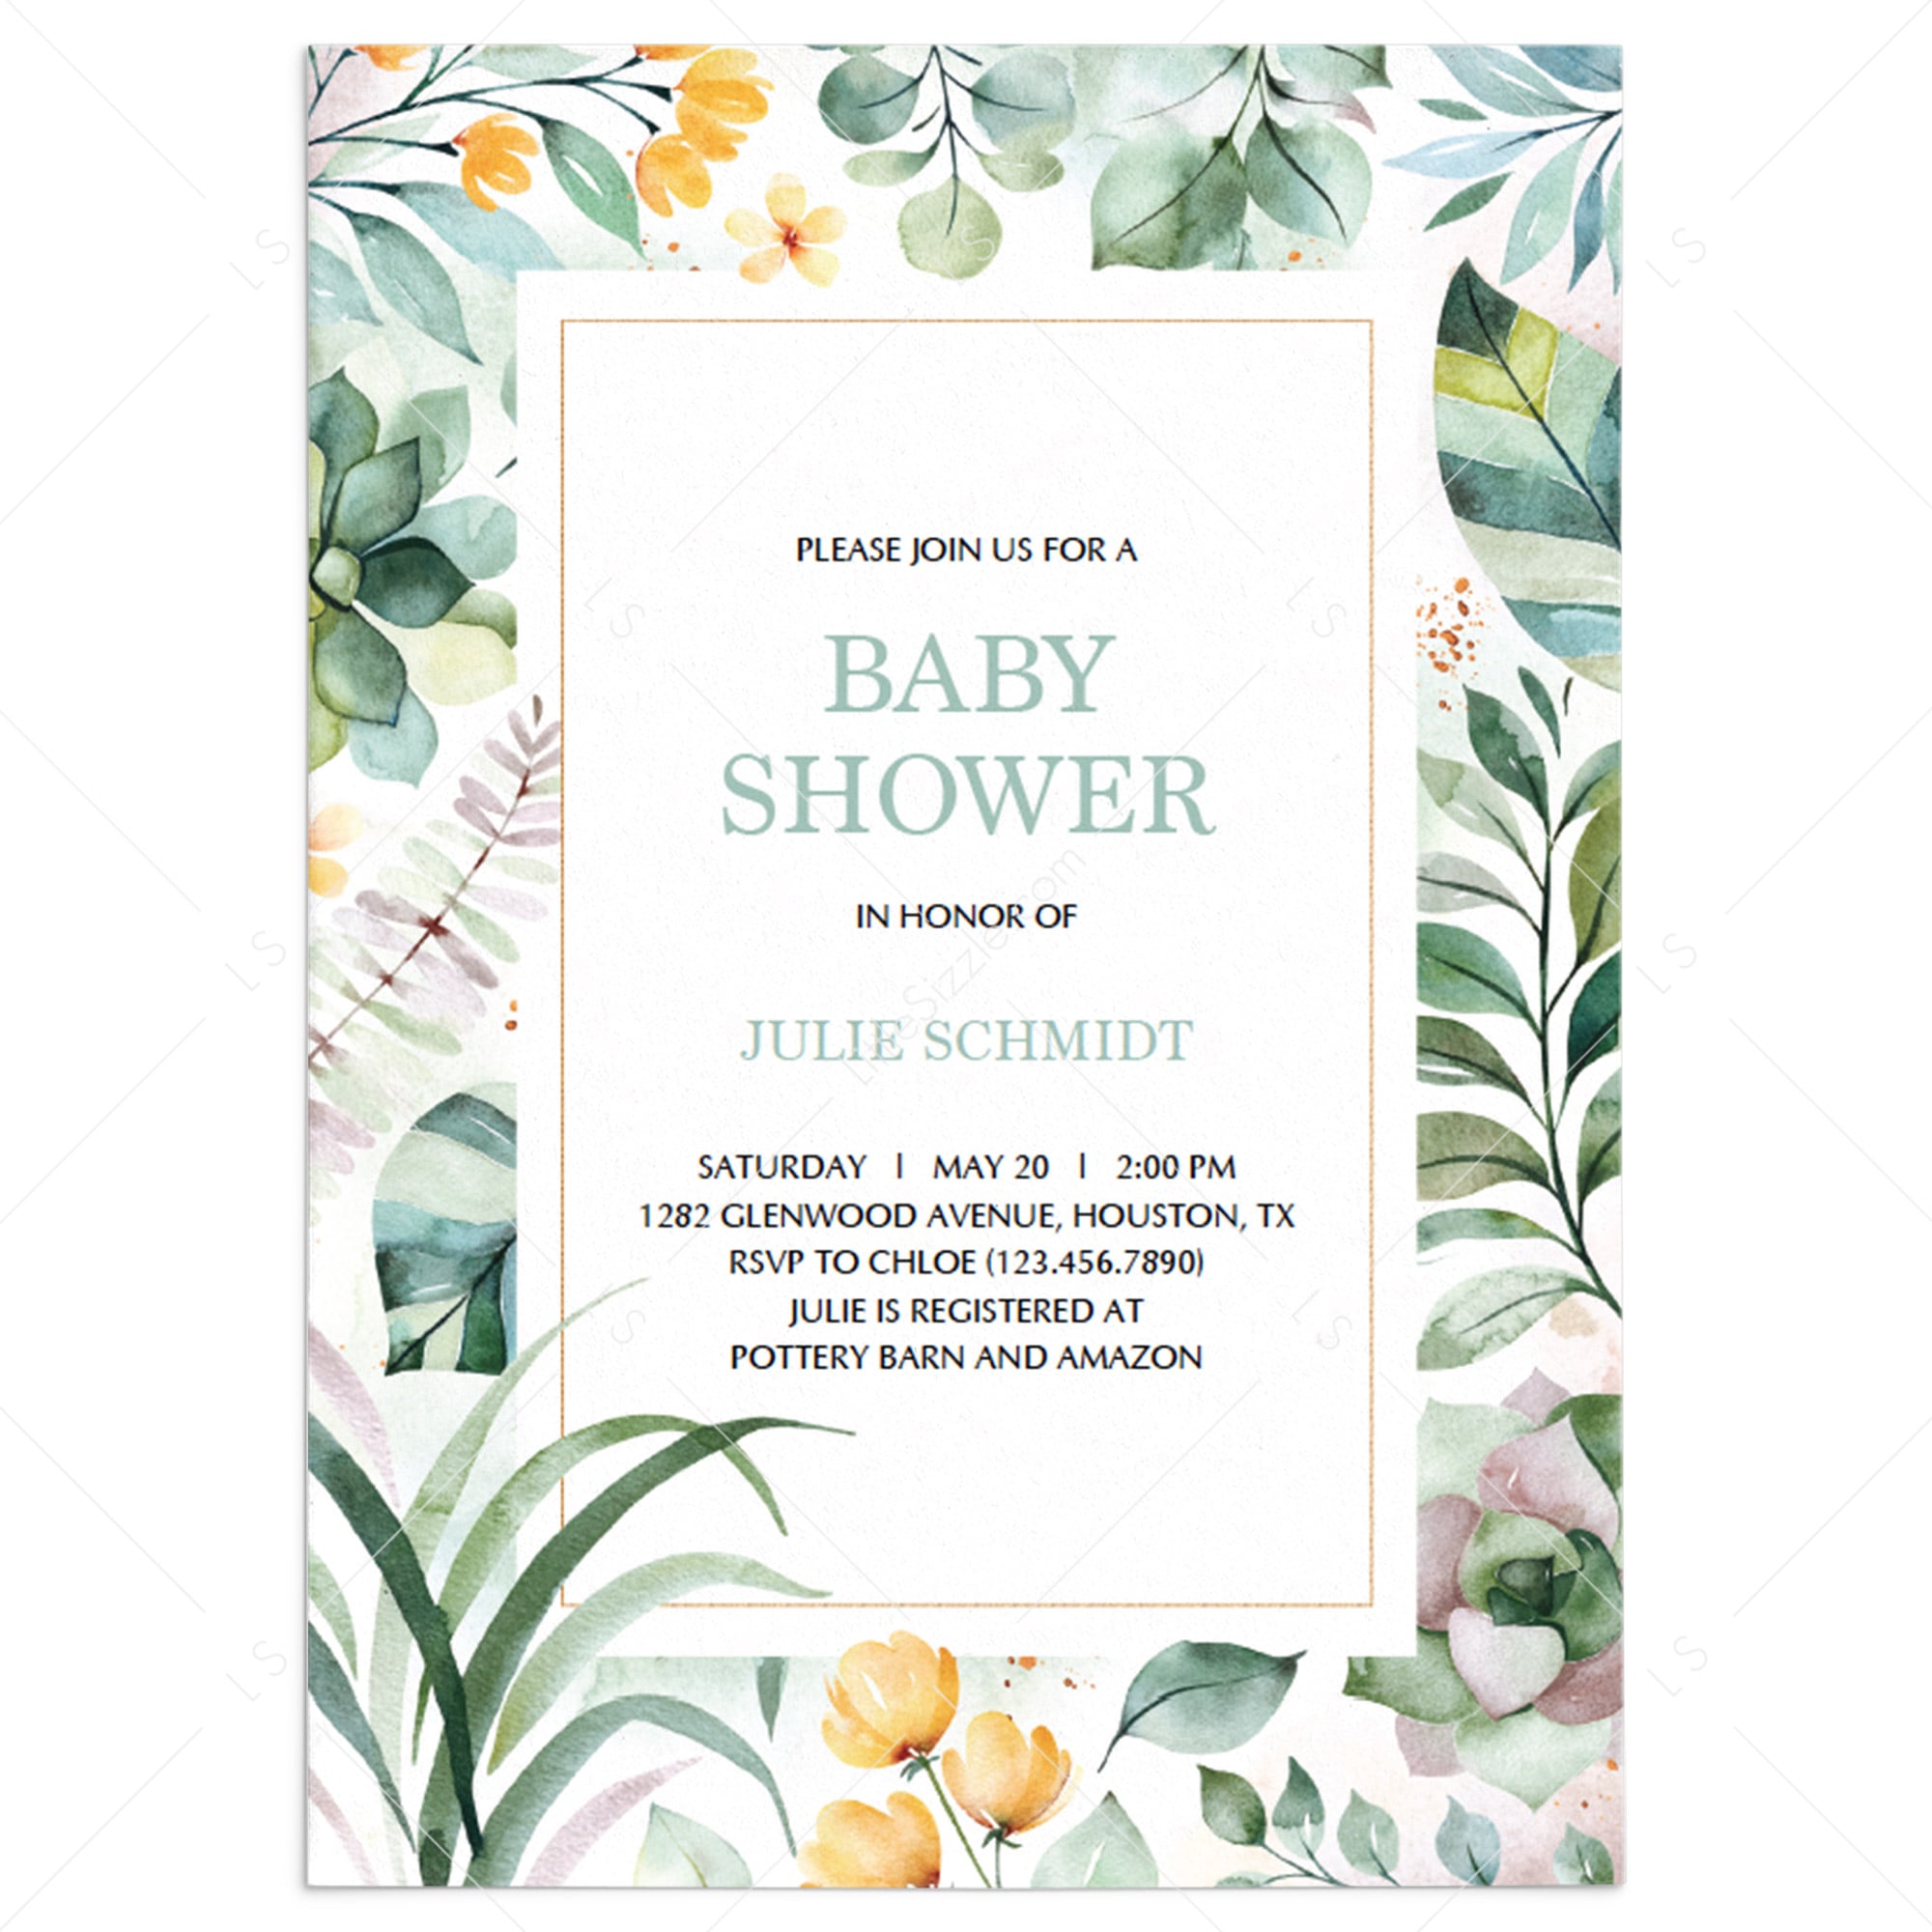 Botanical baby shower invitation template by LittleSizzle